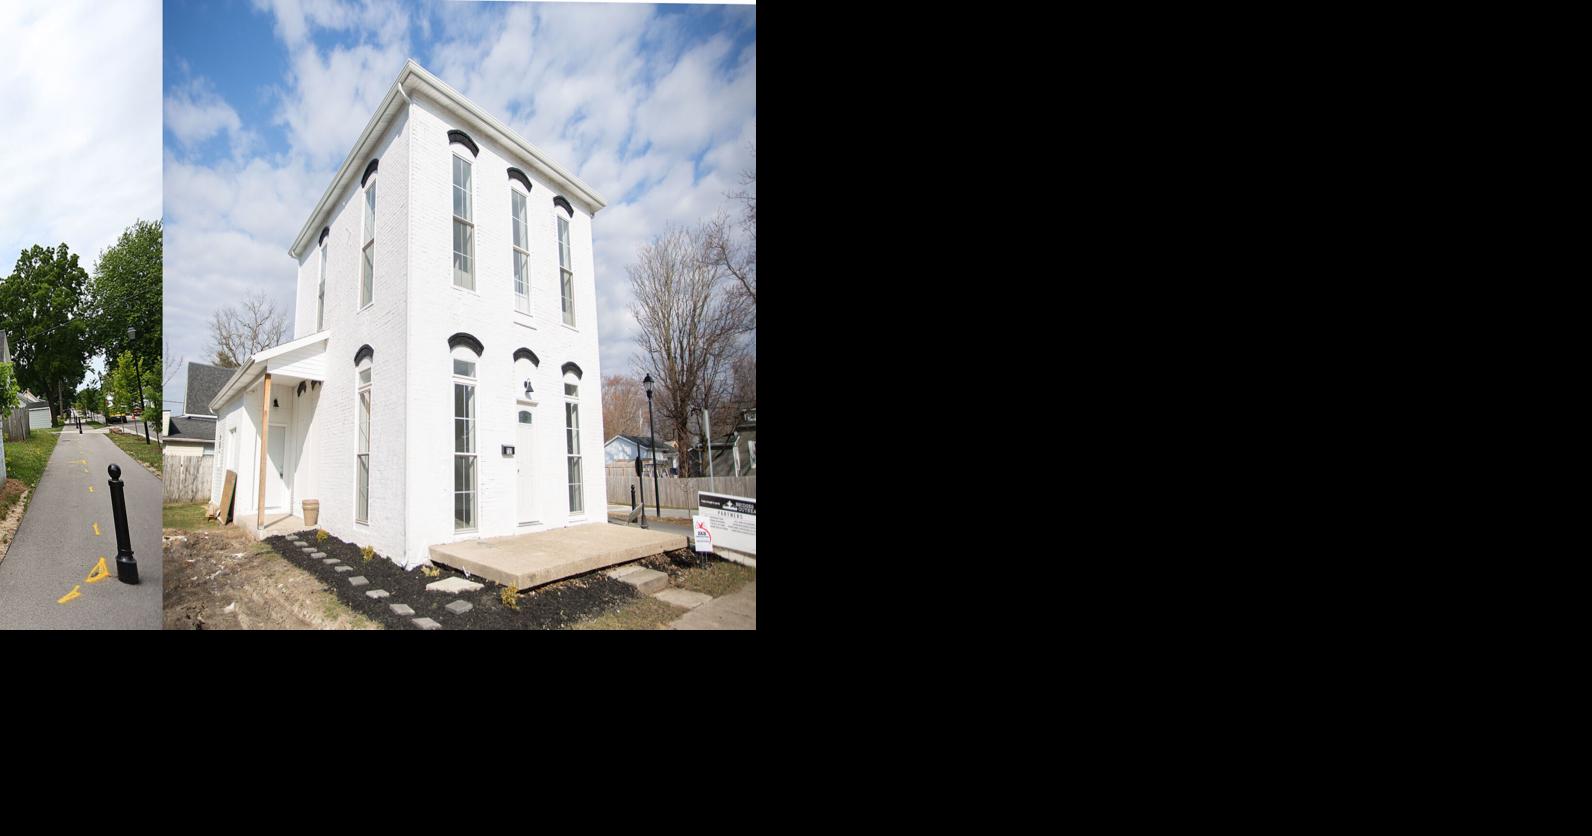 Bridges Outreach completes renovation of historic house | Local news